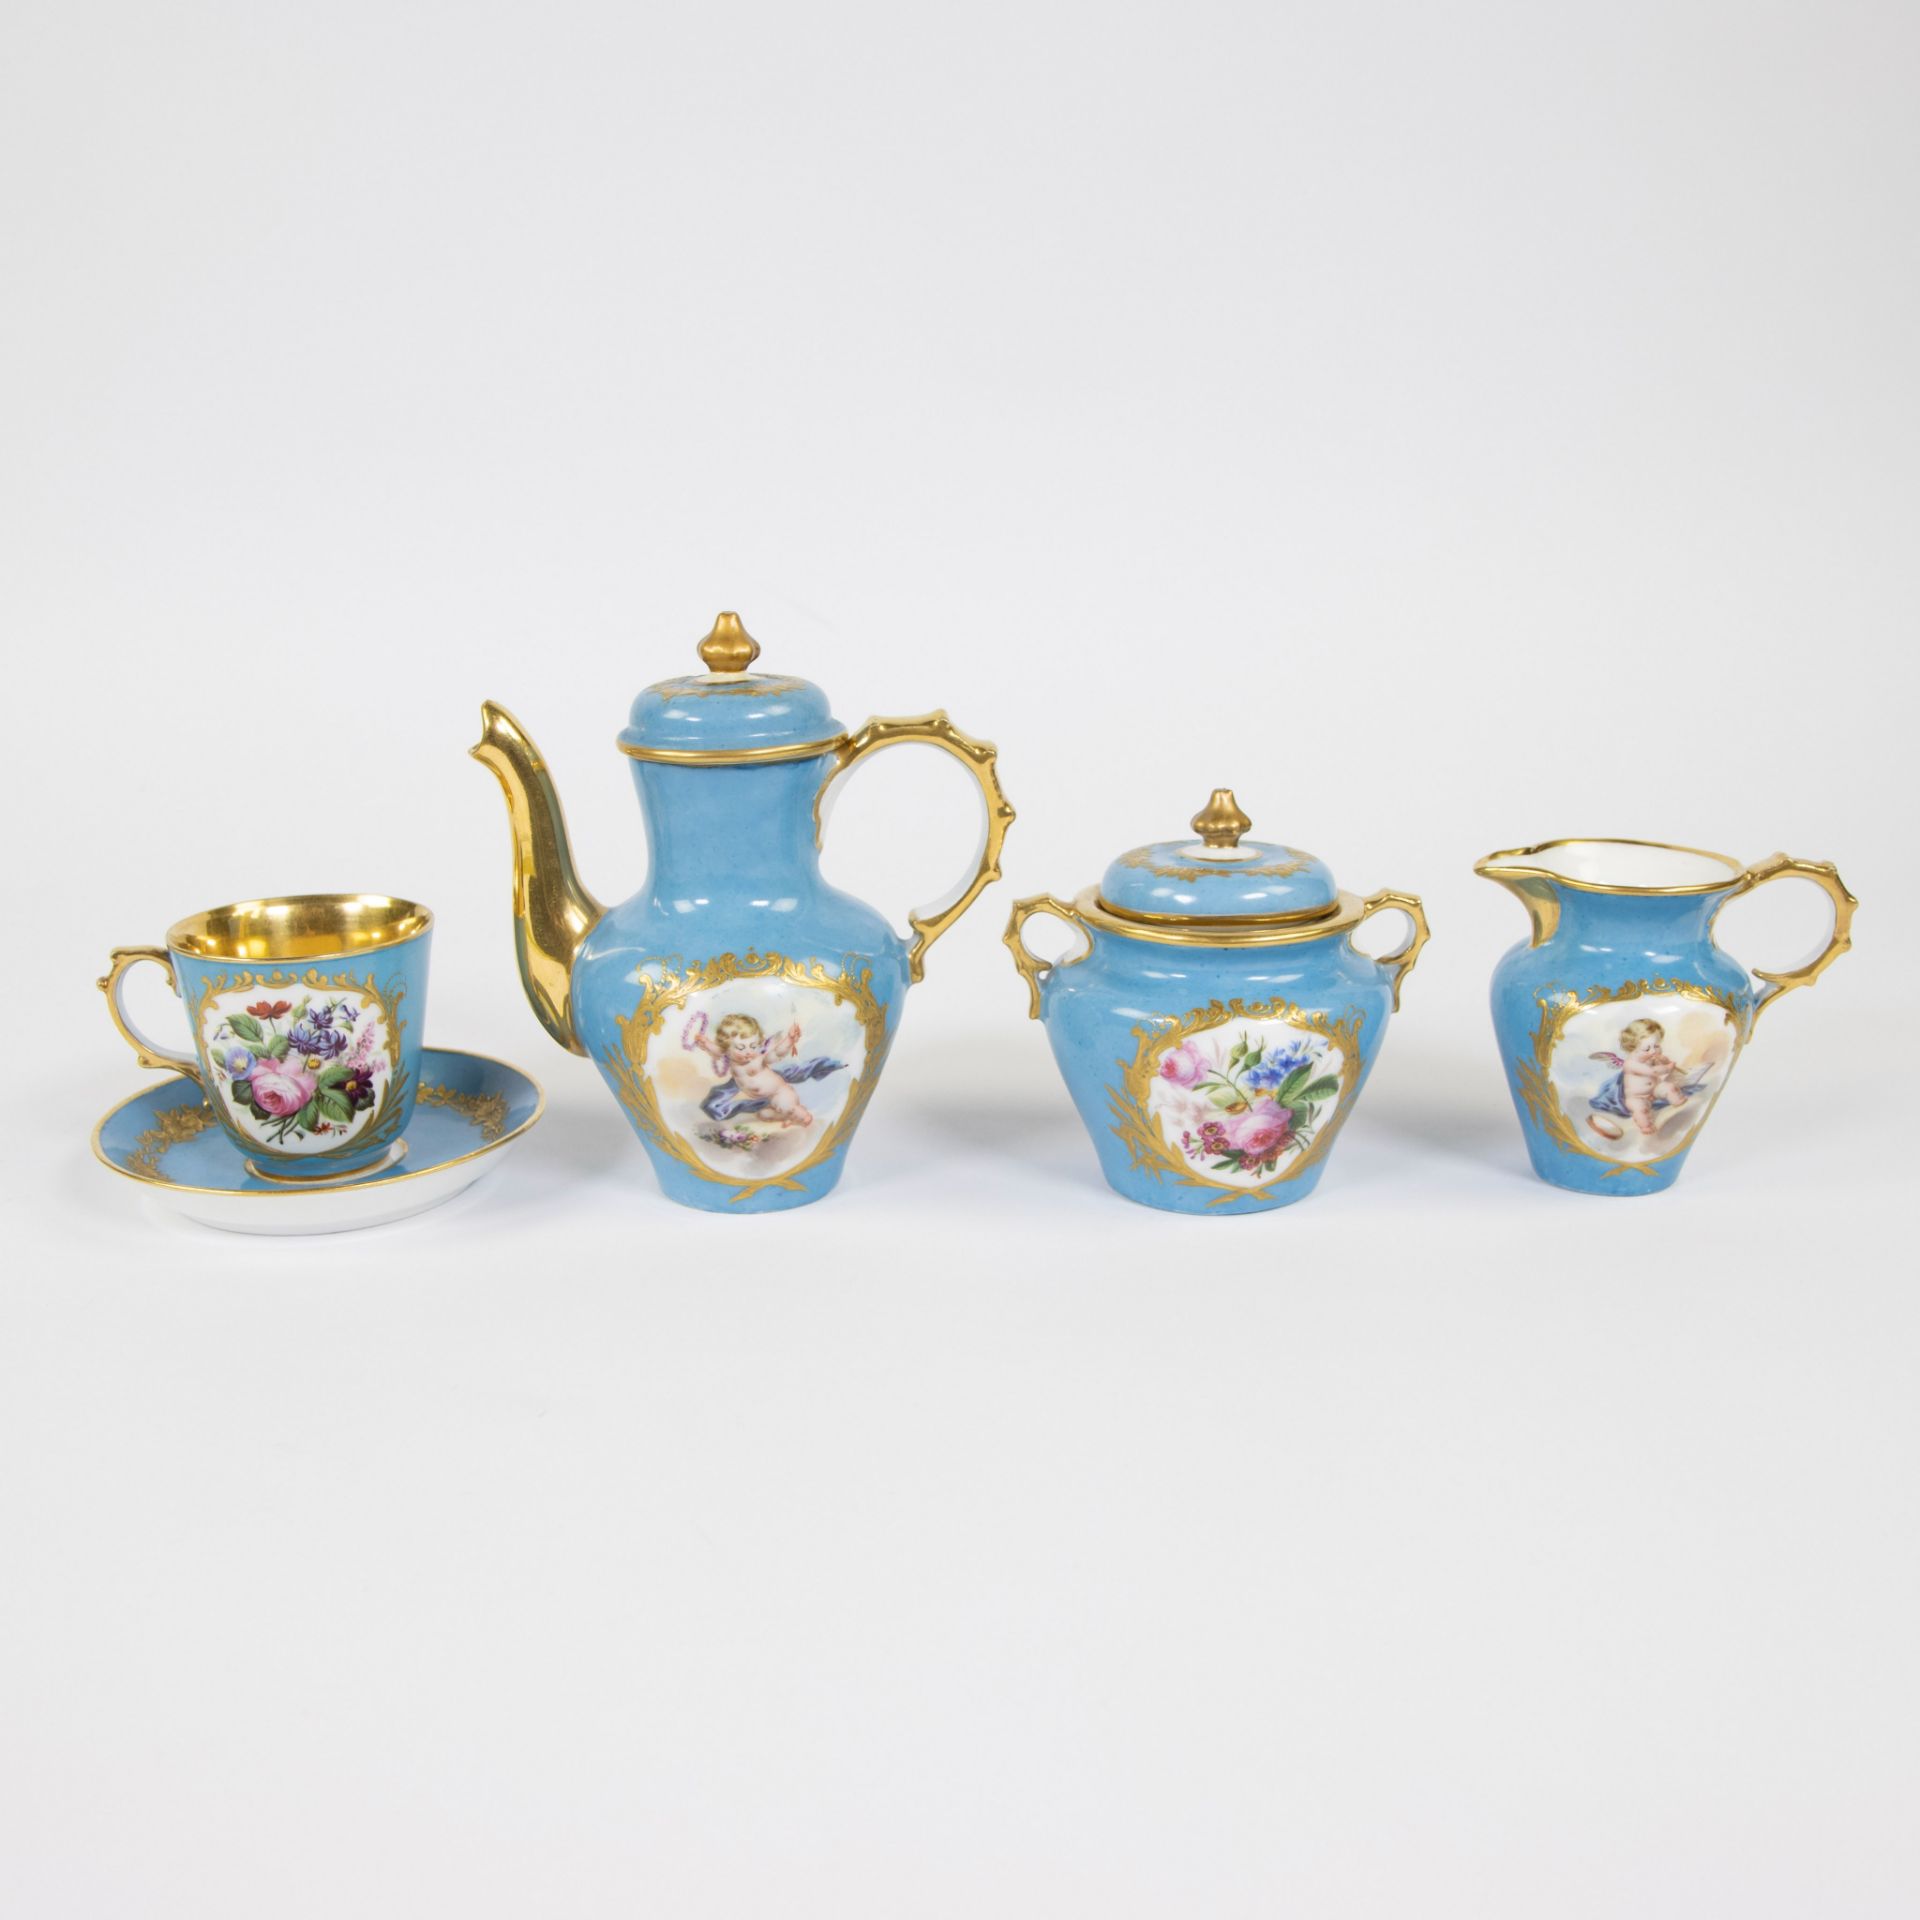 Mokka set solitaire or égoïste in porcelain decorated with cherubs and gold painting, Paris ca 1850 - Image 3 of 5